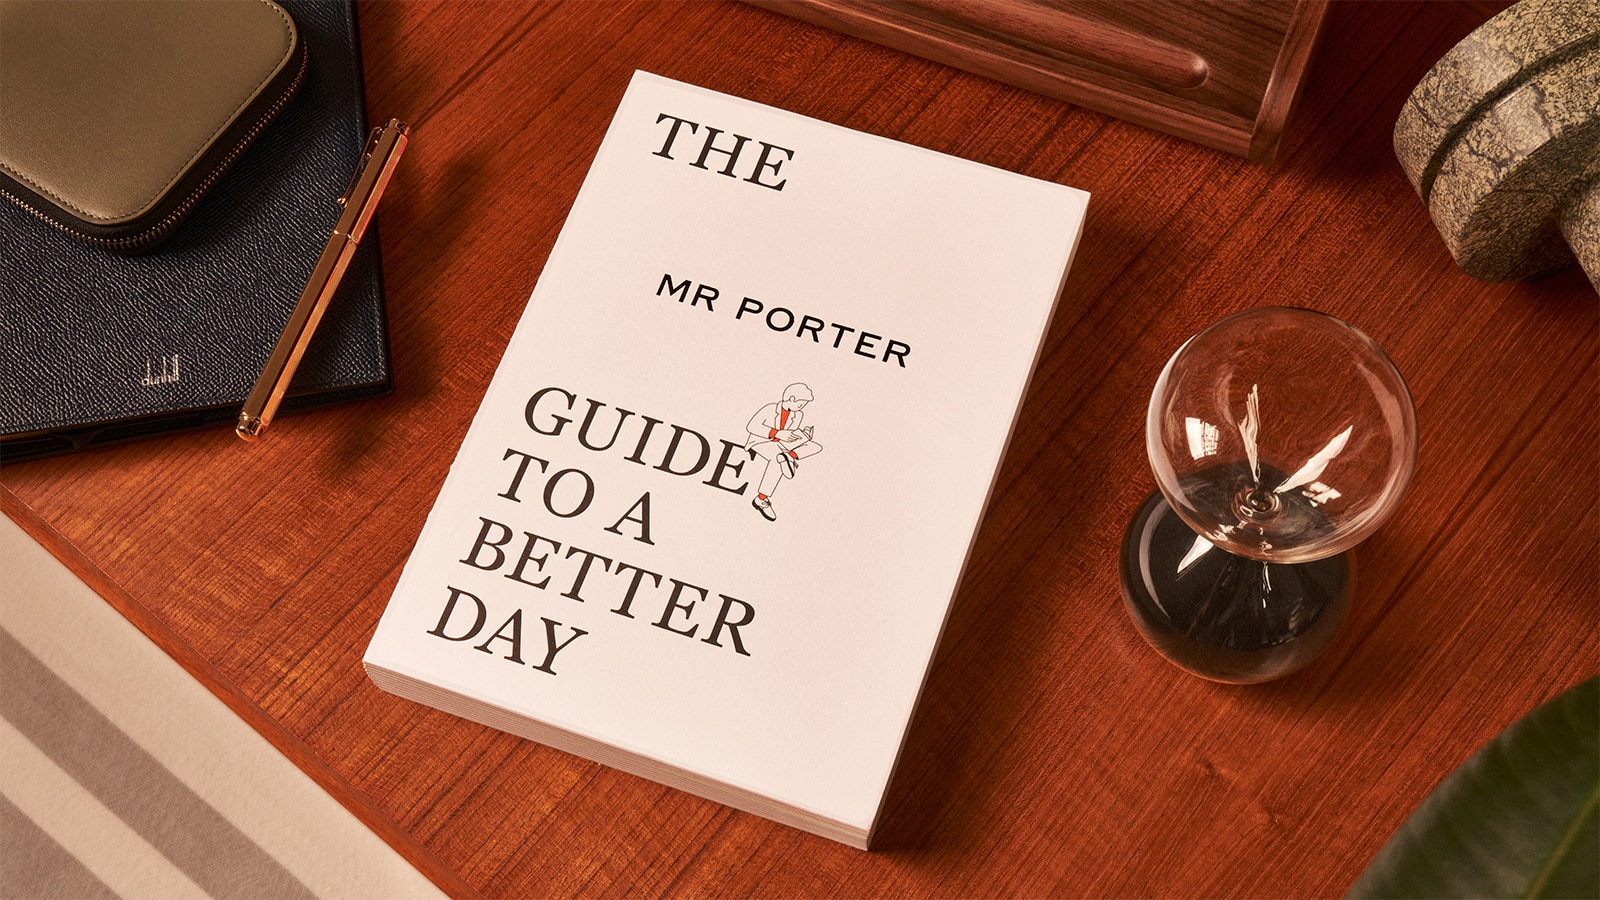 The MR PORTER Guide To A Better Day: 41 Tips To Get You Started | The  Journal | MR PORTER